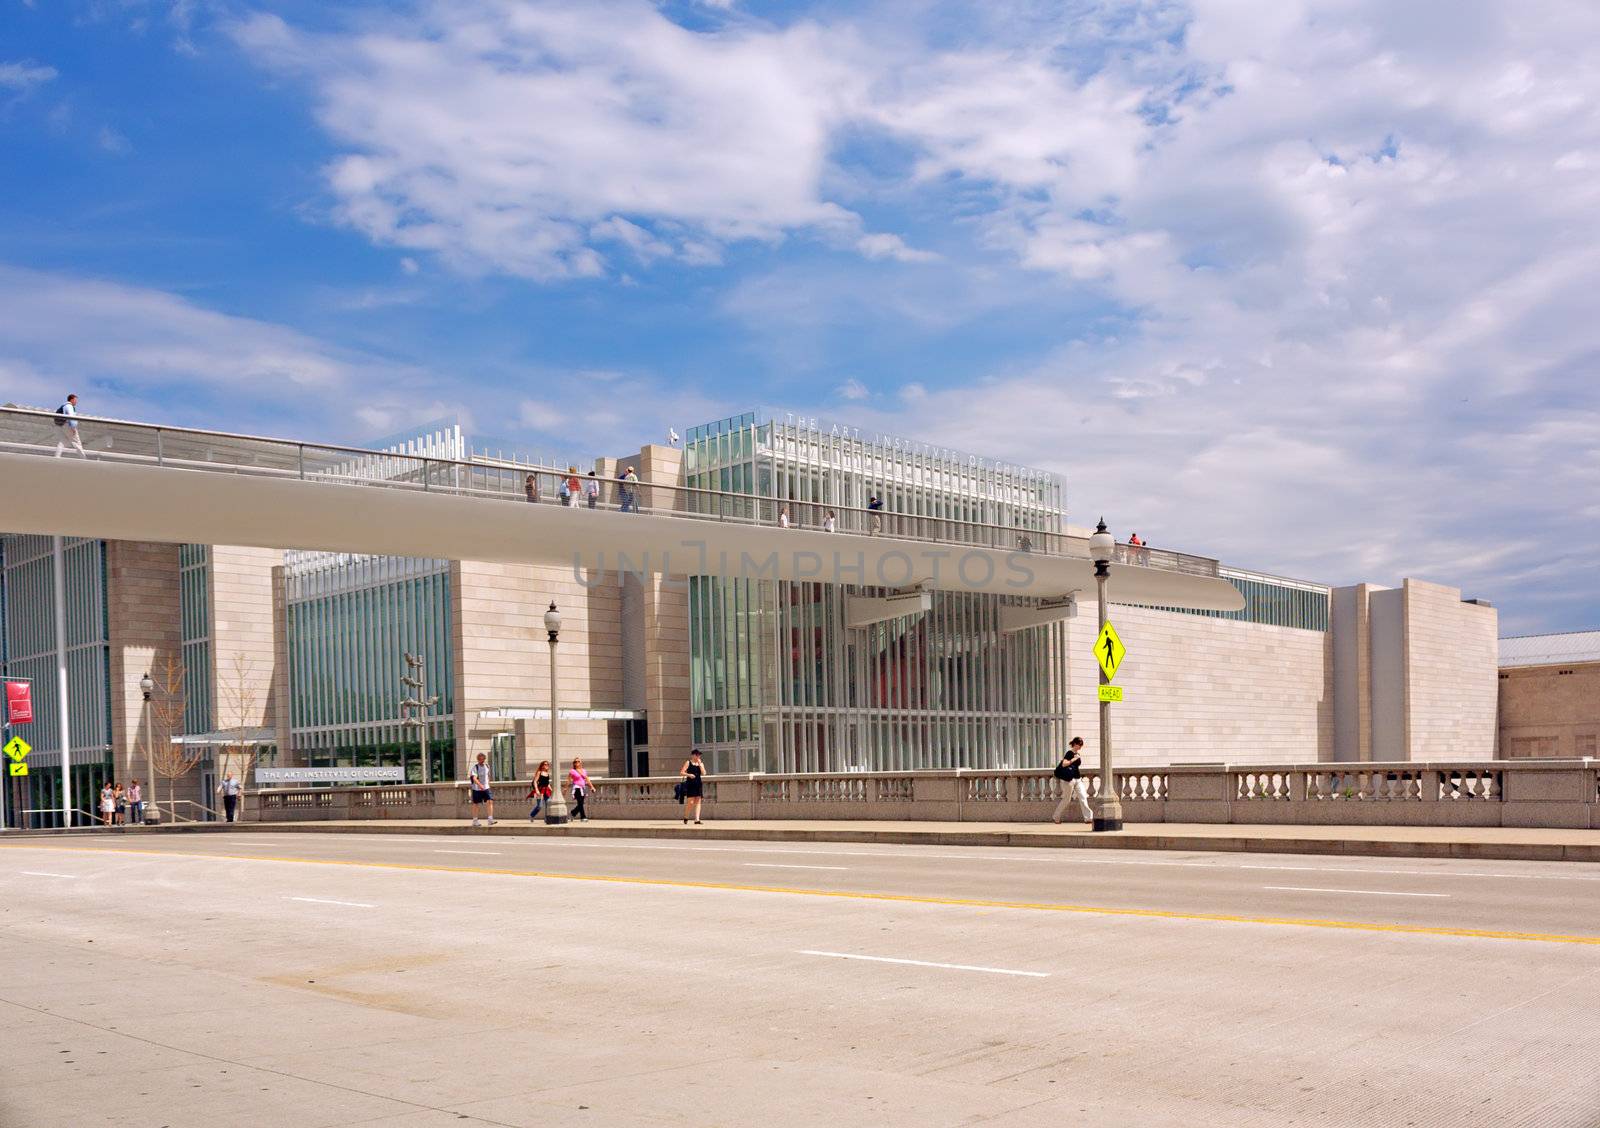 The Art Institute of Chicago by Roka